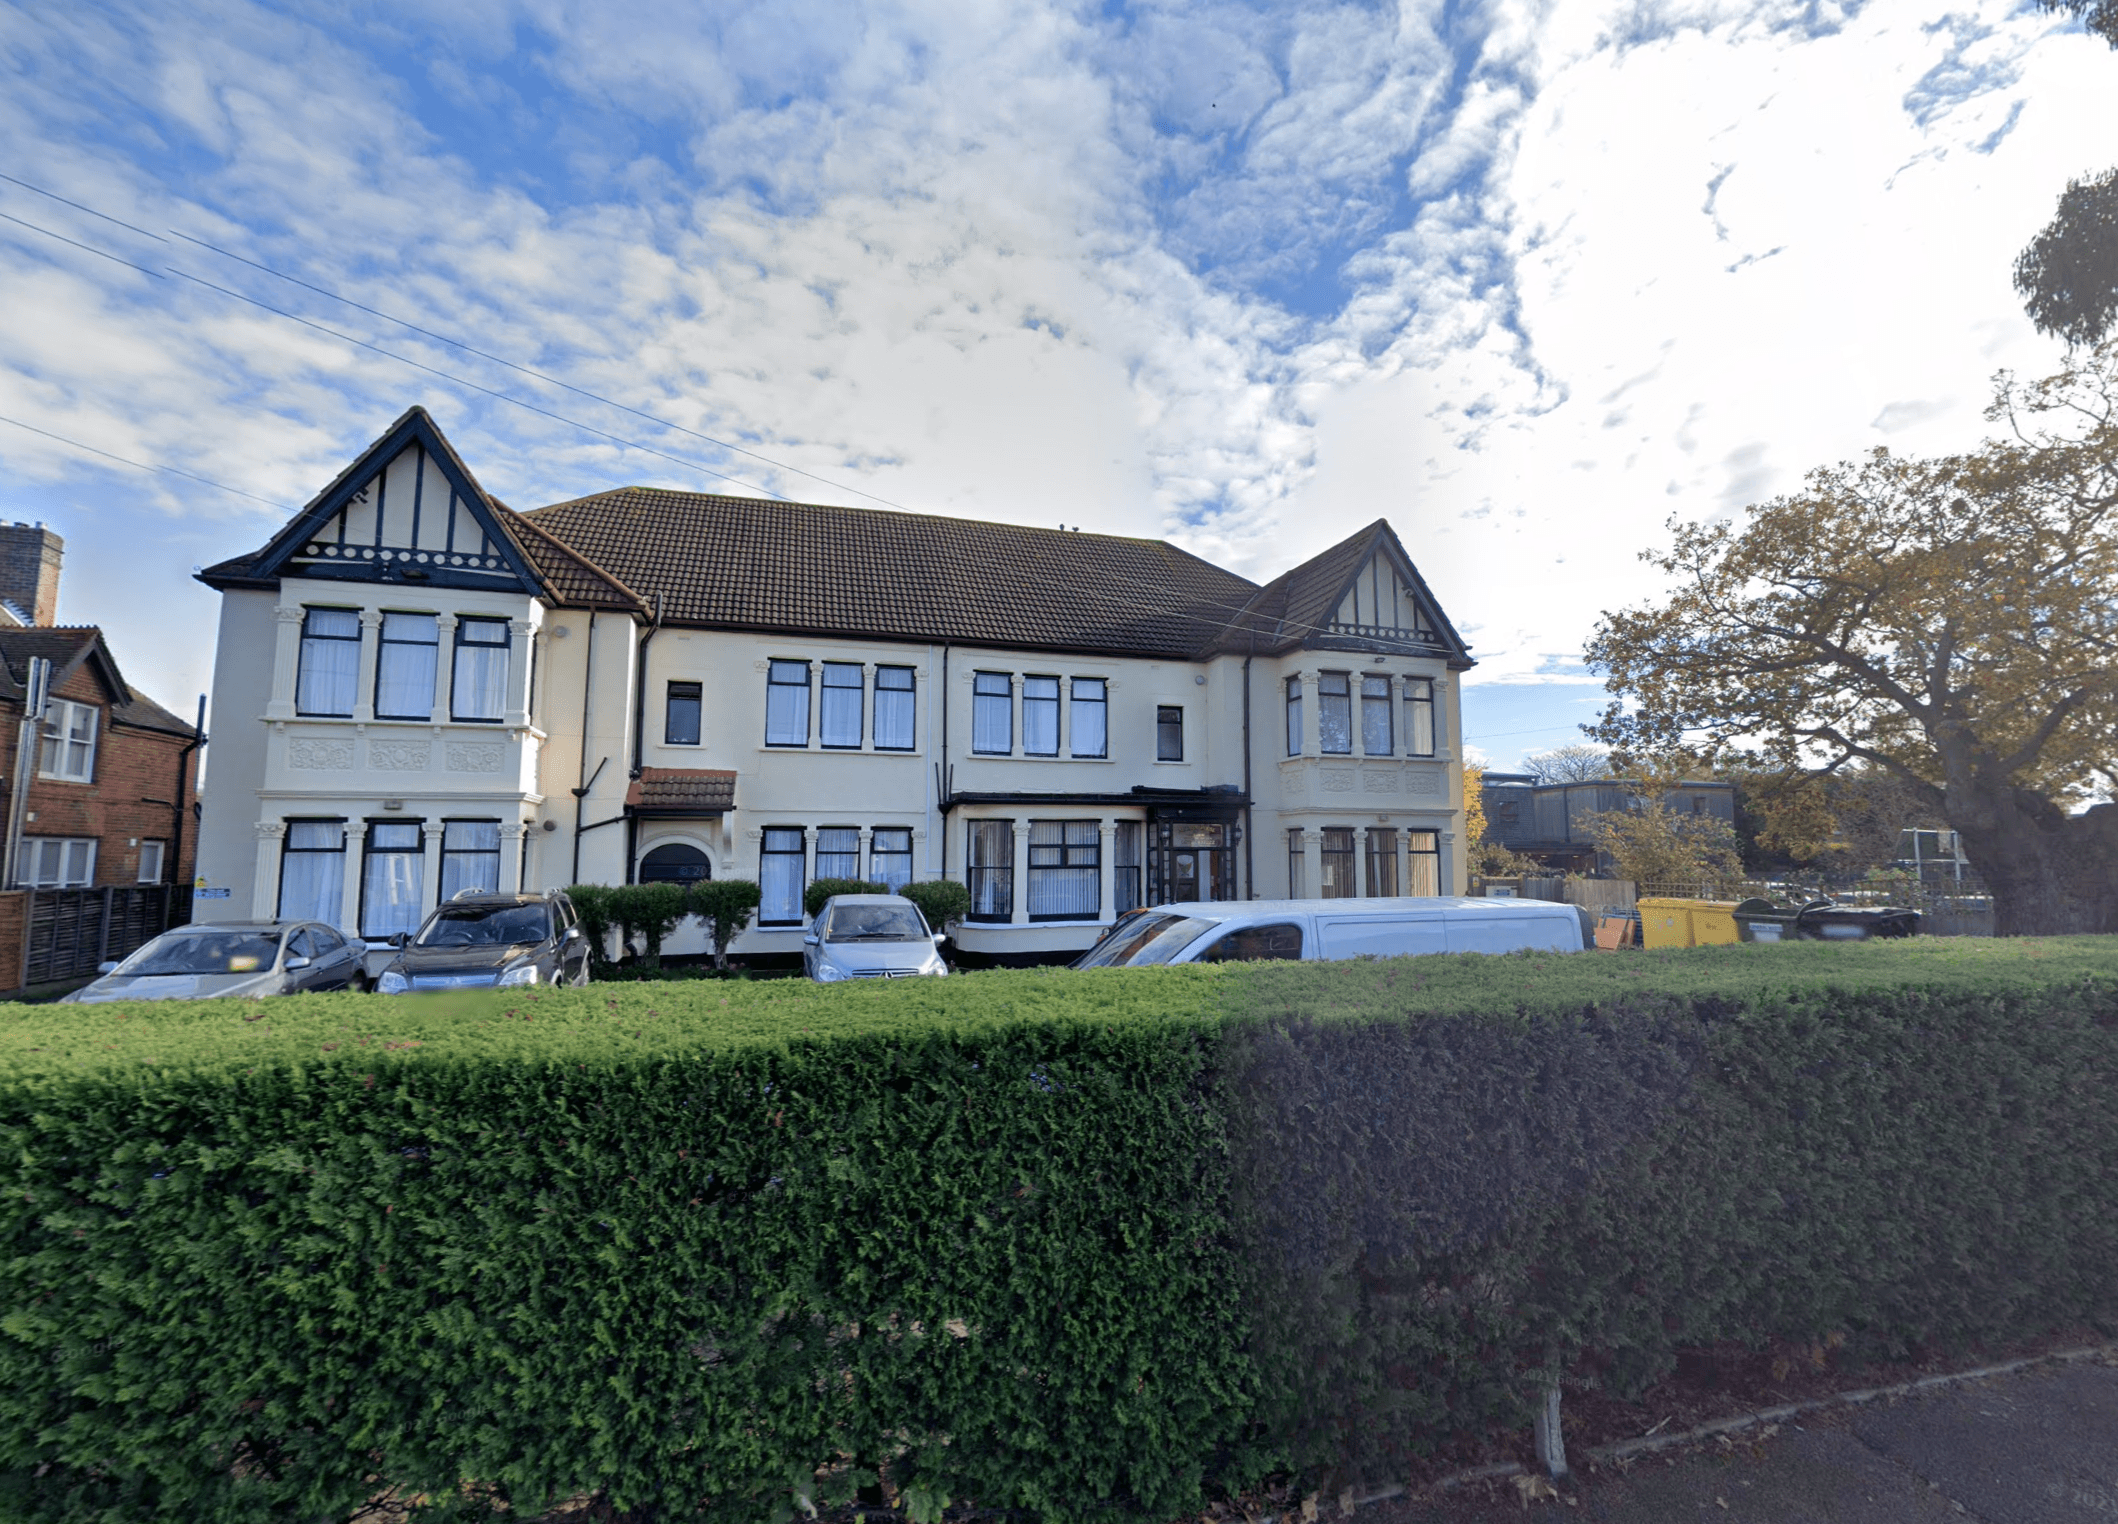 Exterior of Milton House care home in Westcliff-on-Sea, Essex